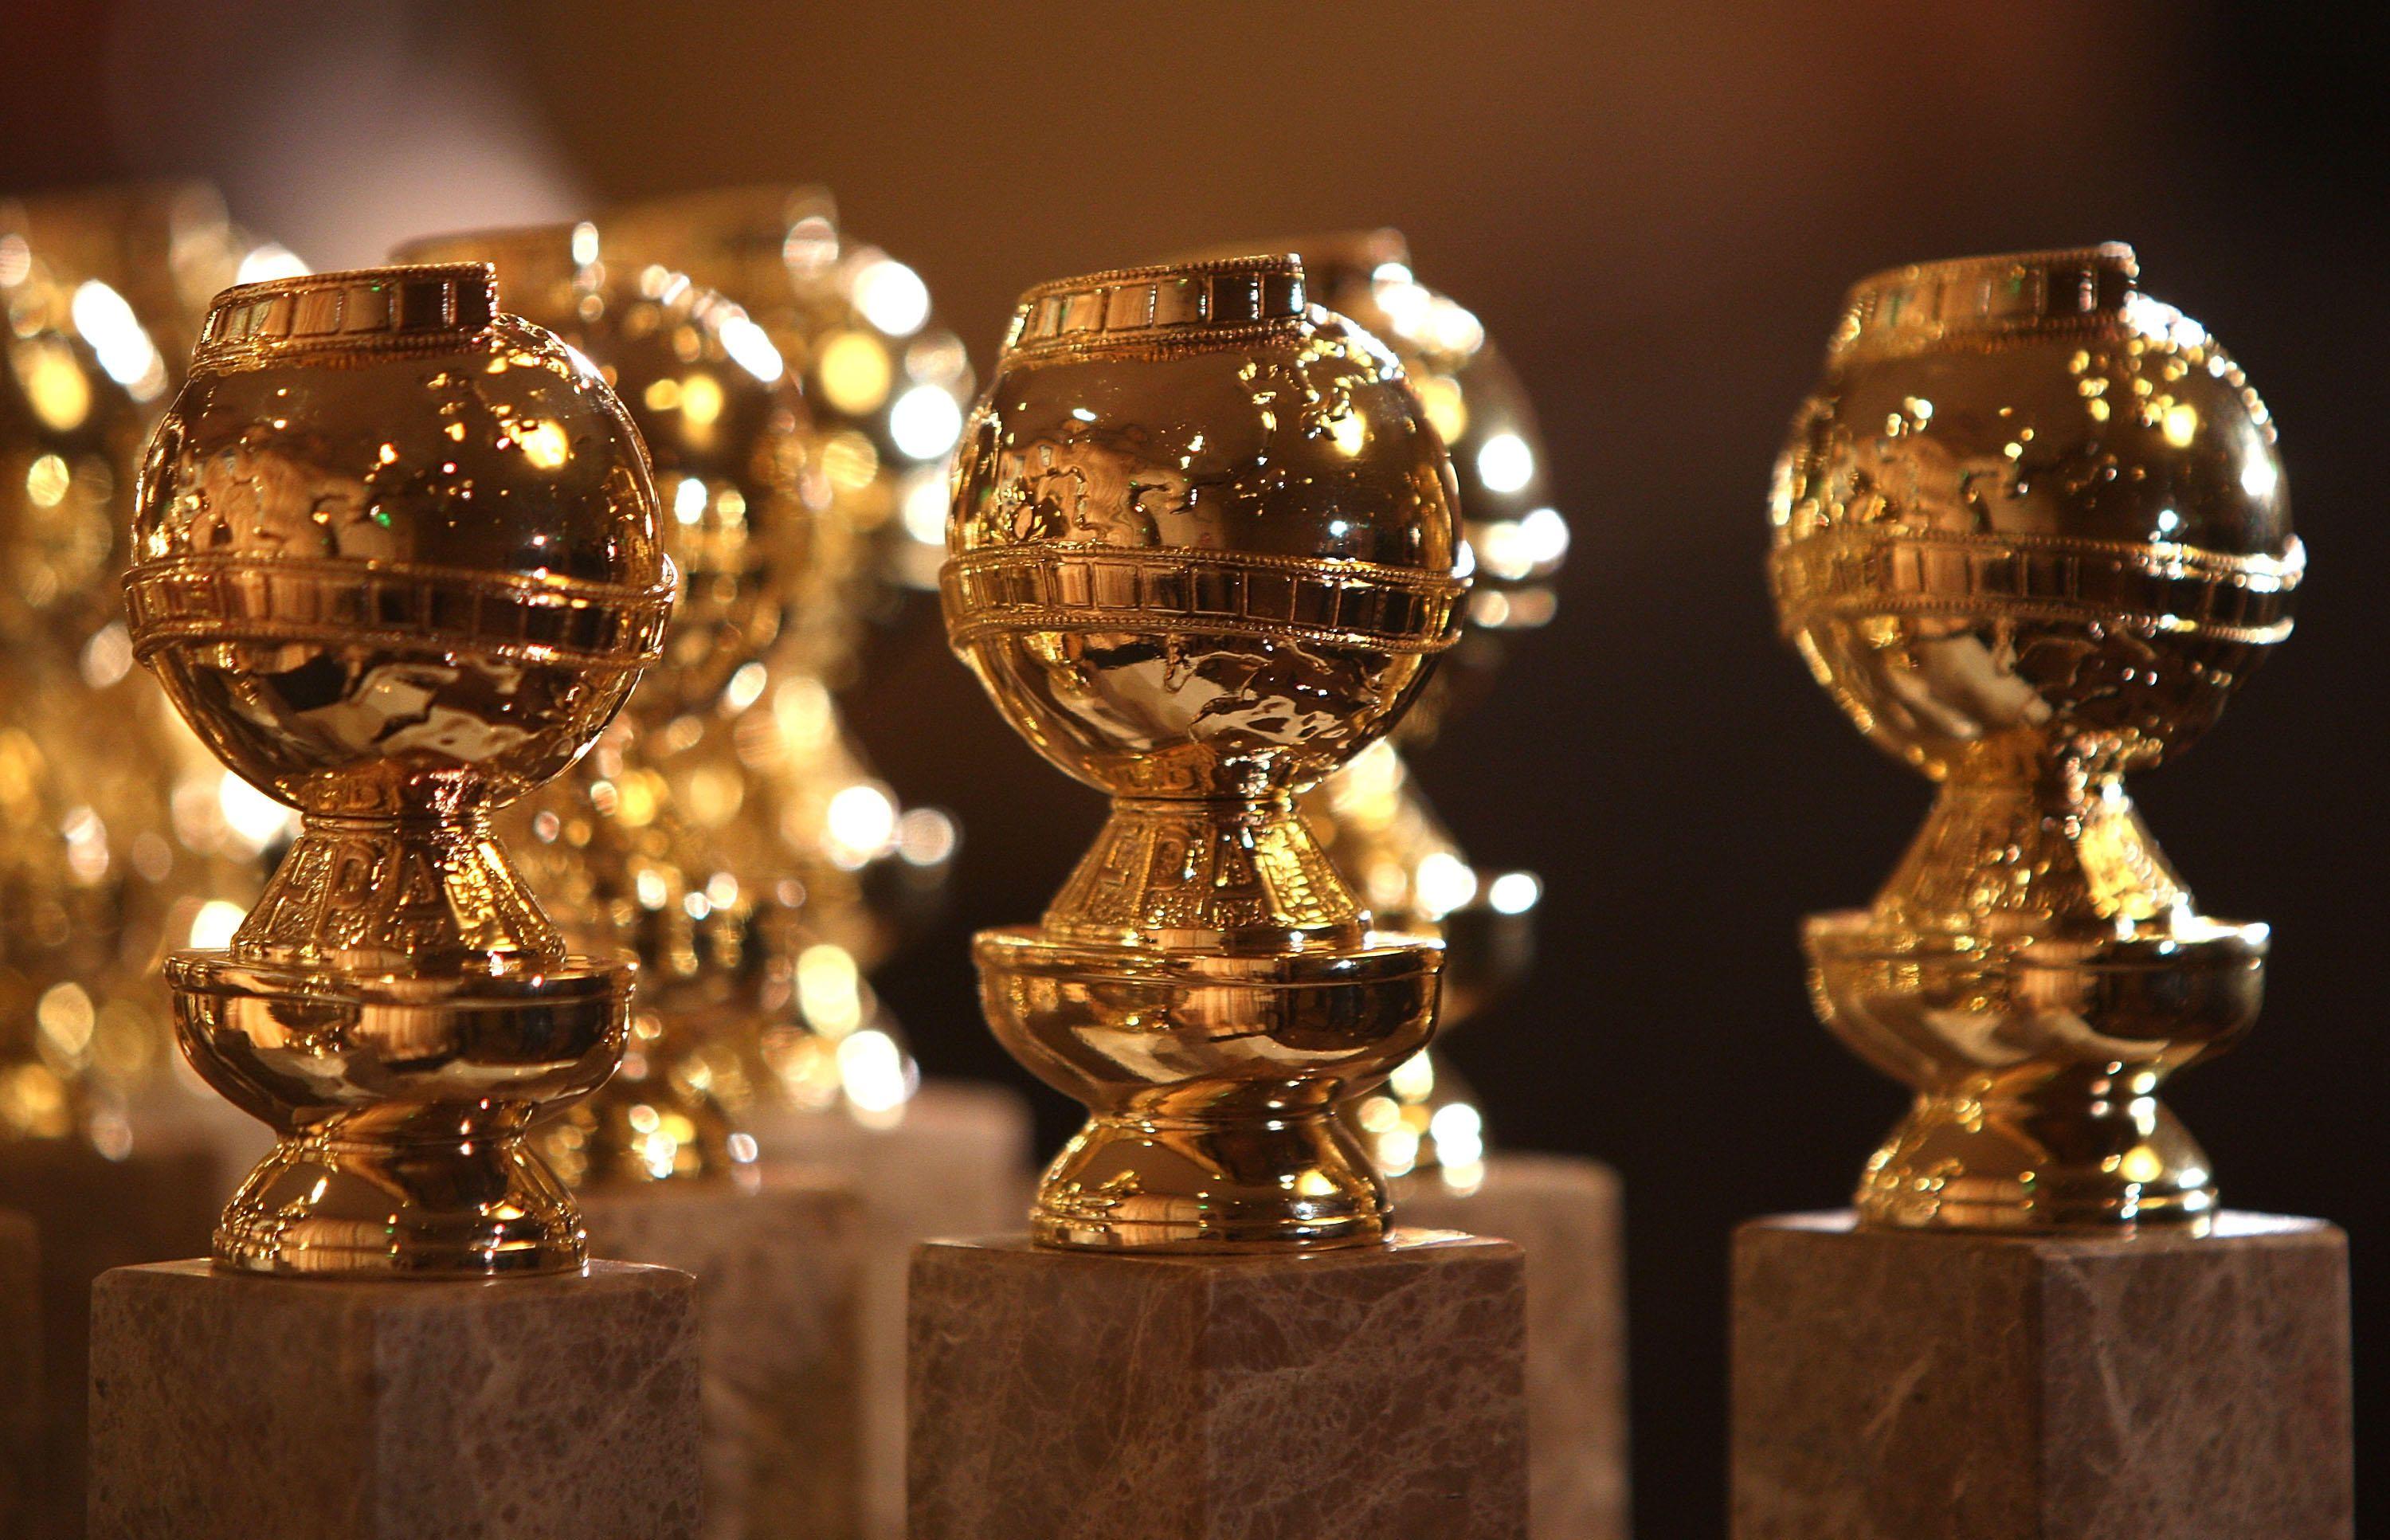 Pacific Gold Globe Logo - Golden Globes 2019: Watch live stream as Andy Samberg and Sandra Oh